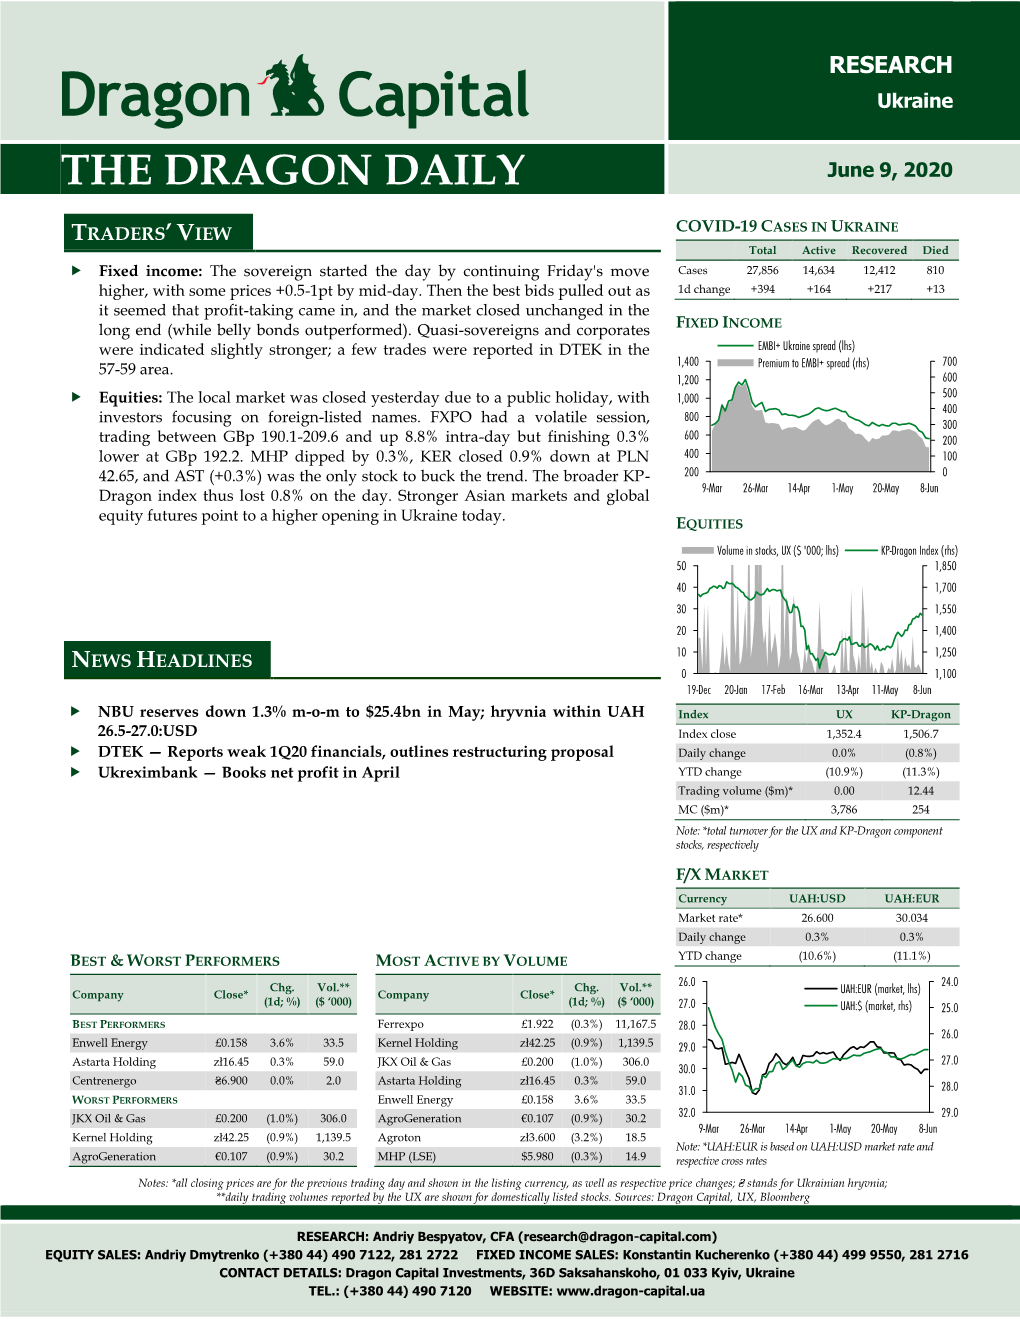 THE DRAGON DAILY June 9, 2020